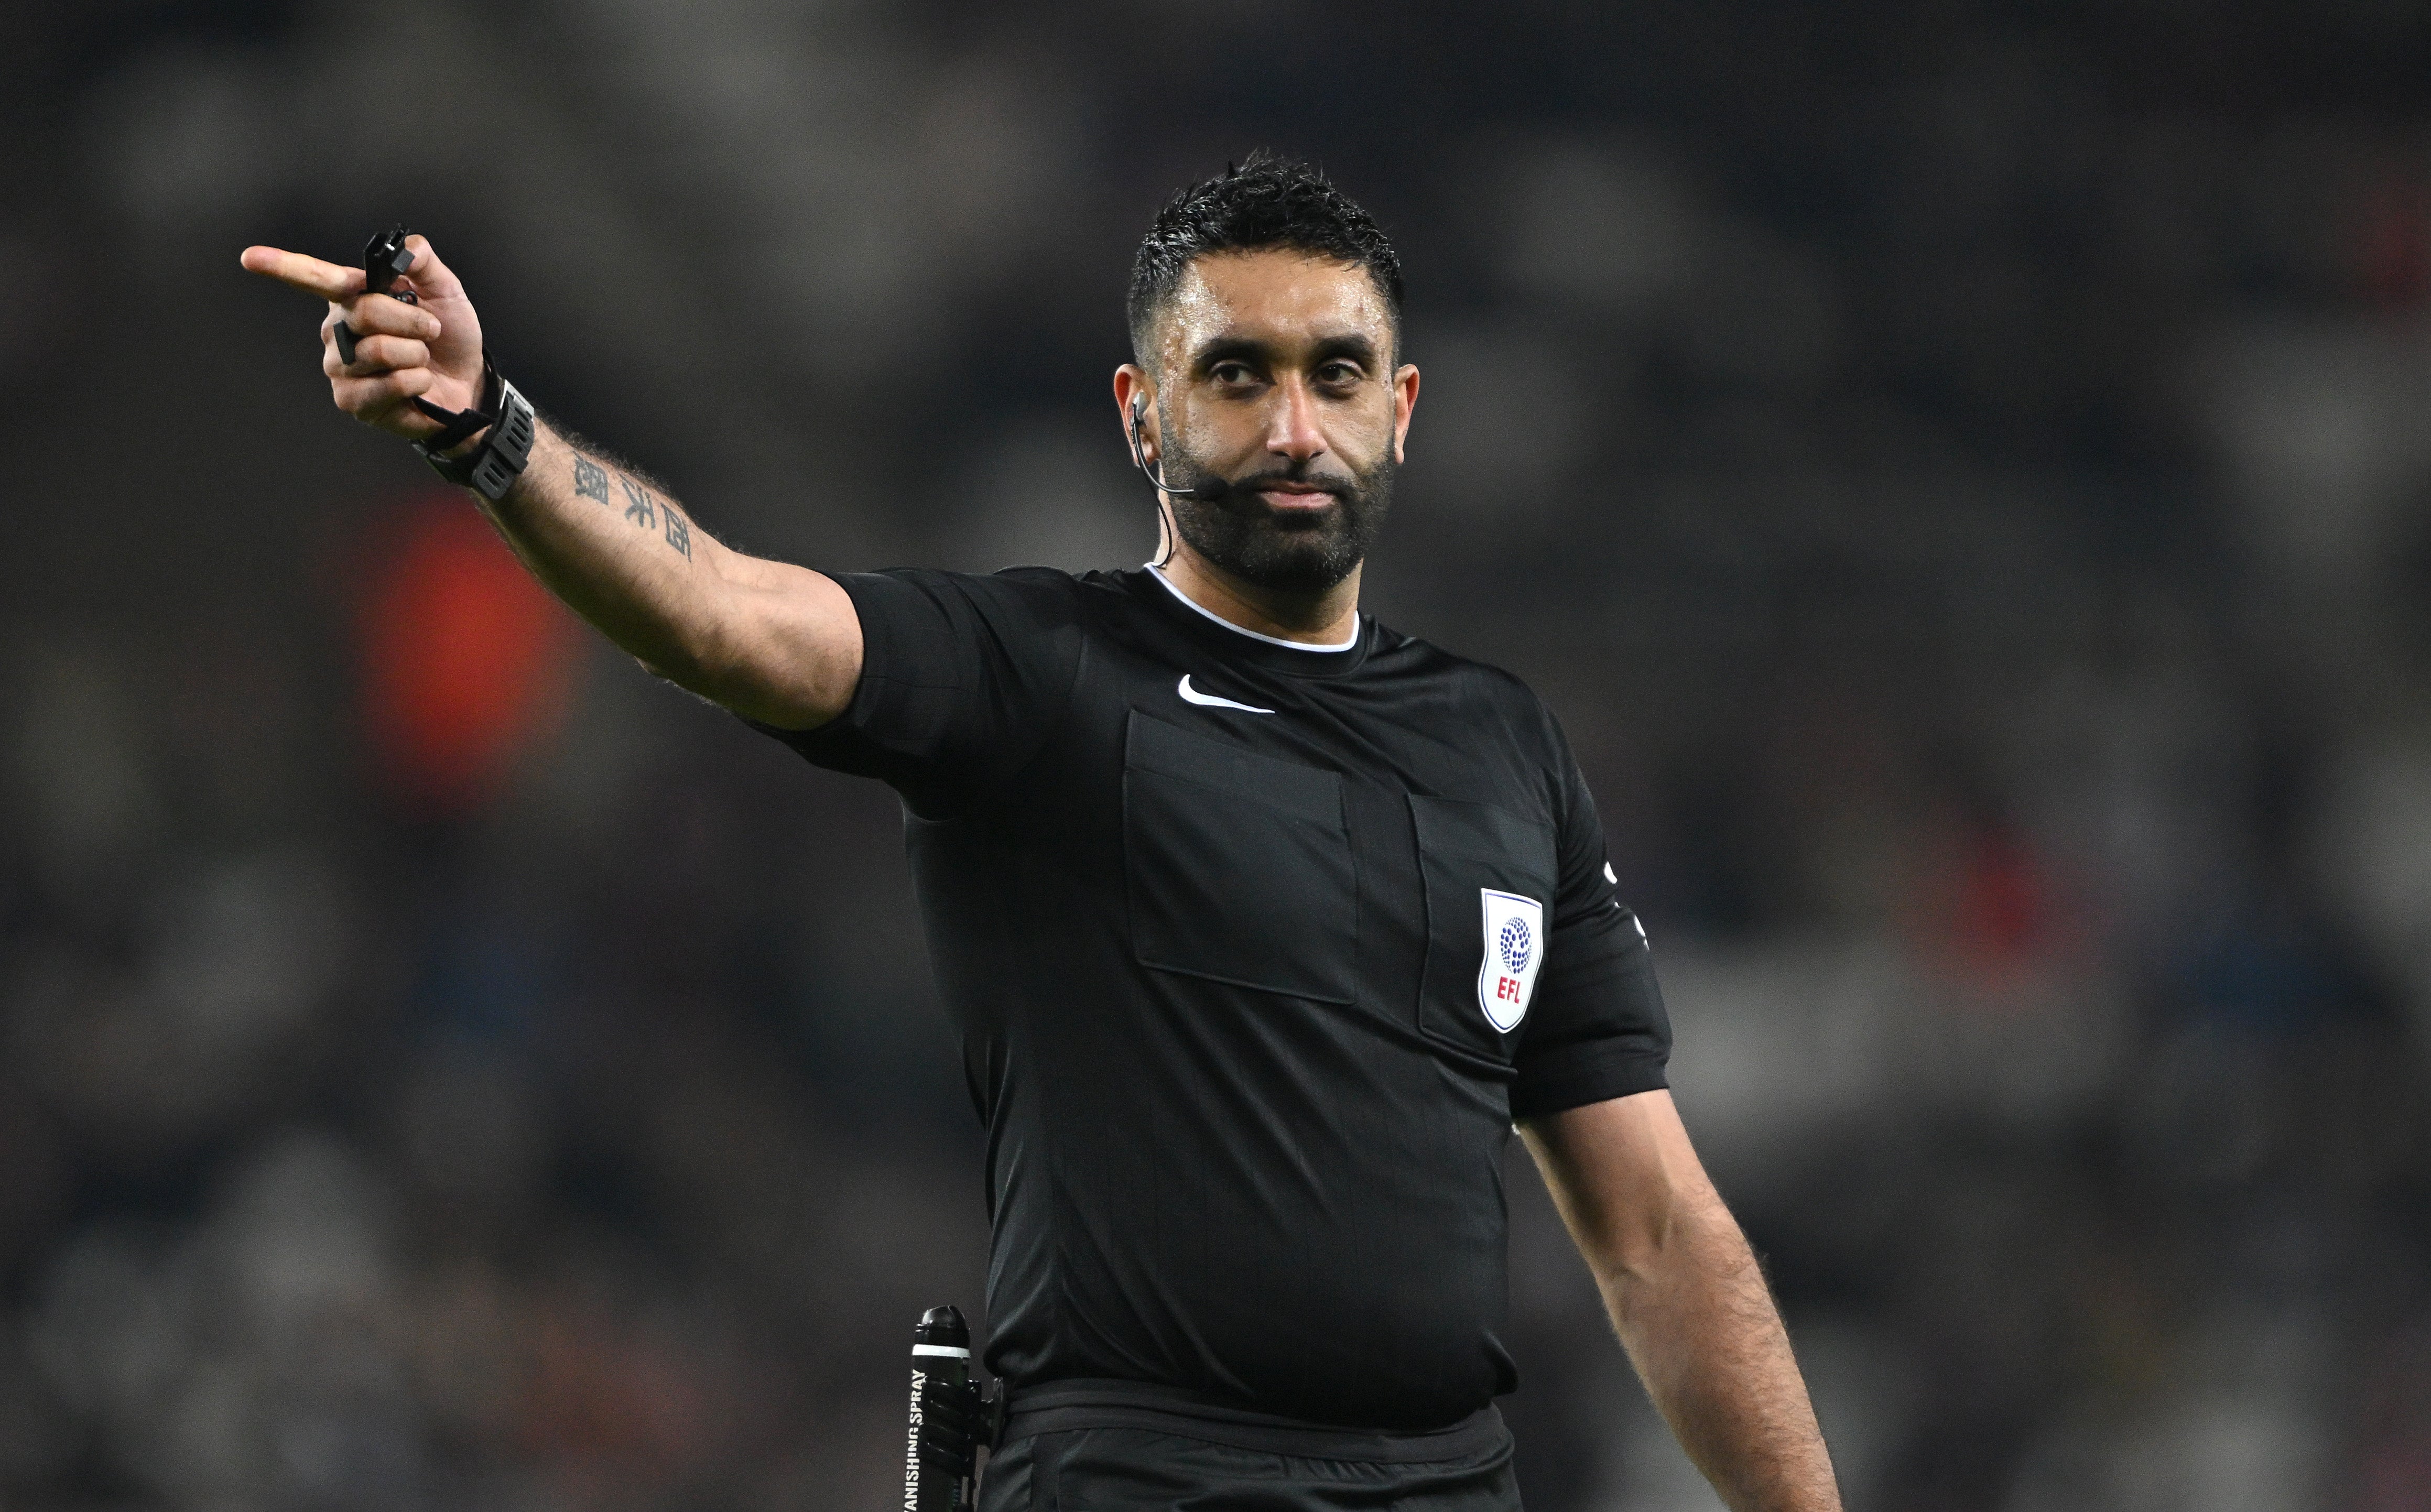 Sunny Singh Gill becomes first British South Asian to referee in the Premier League